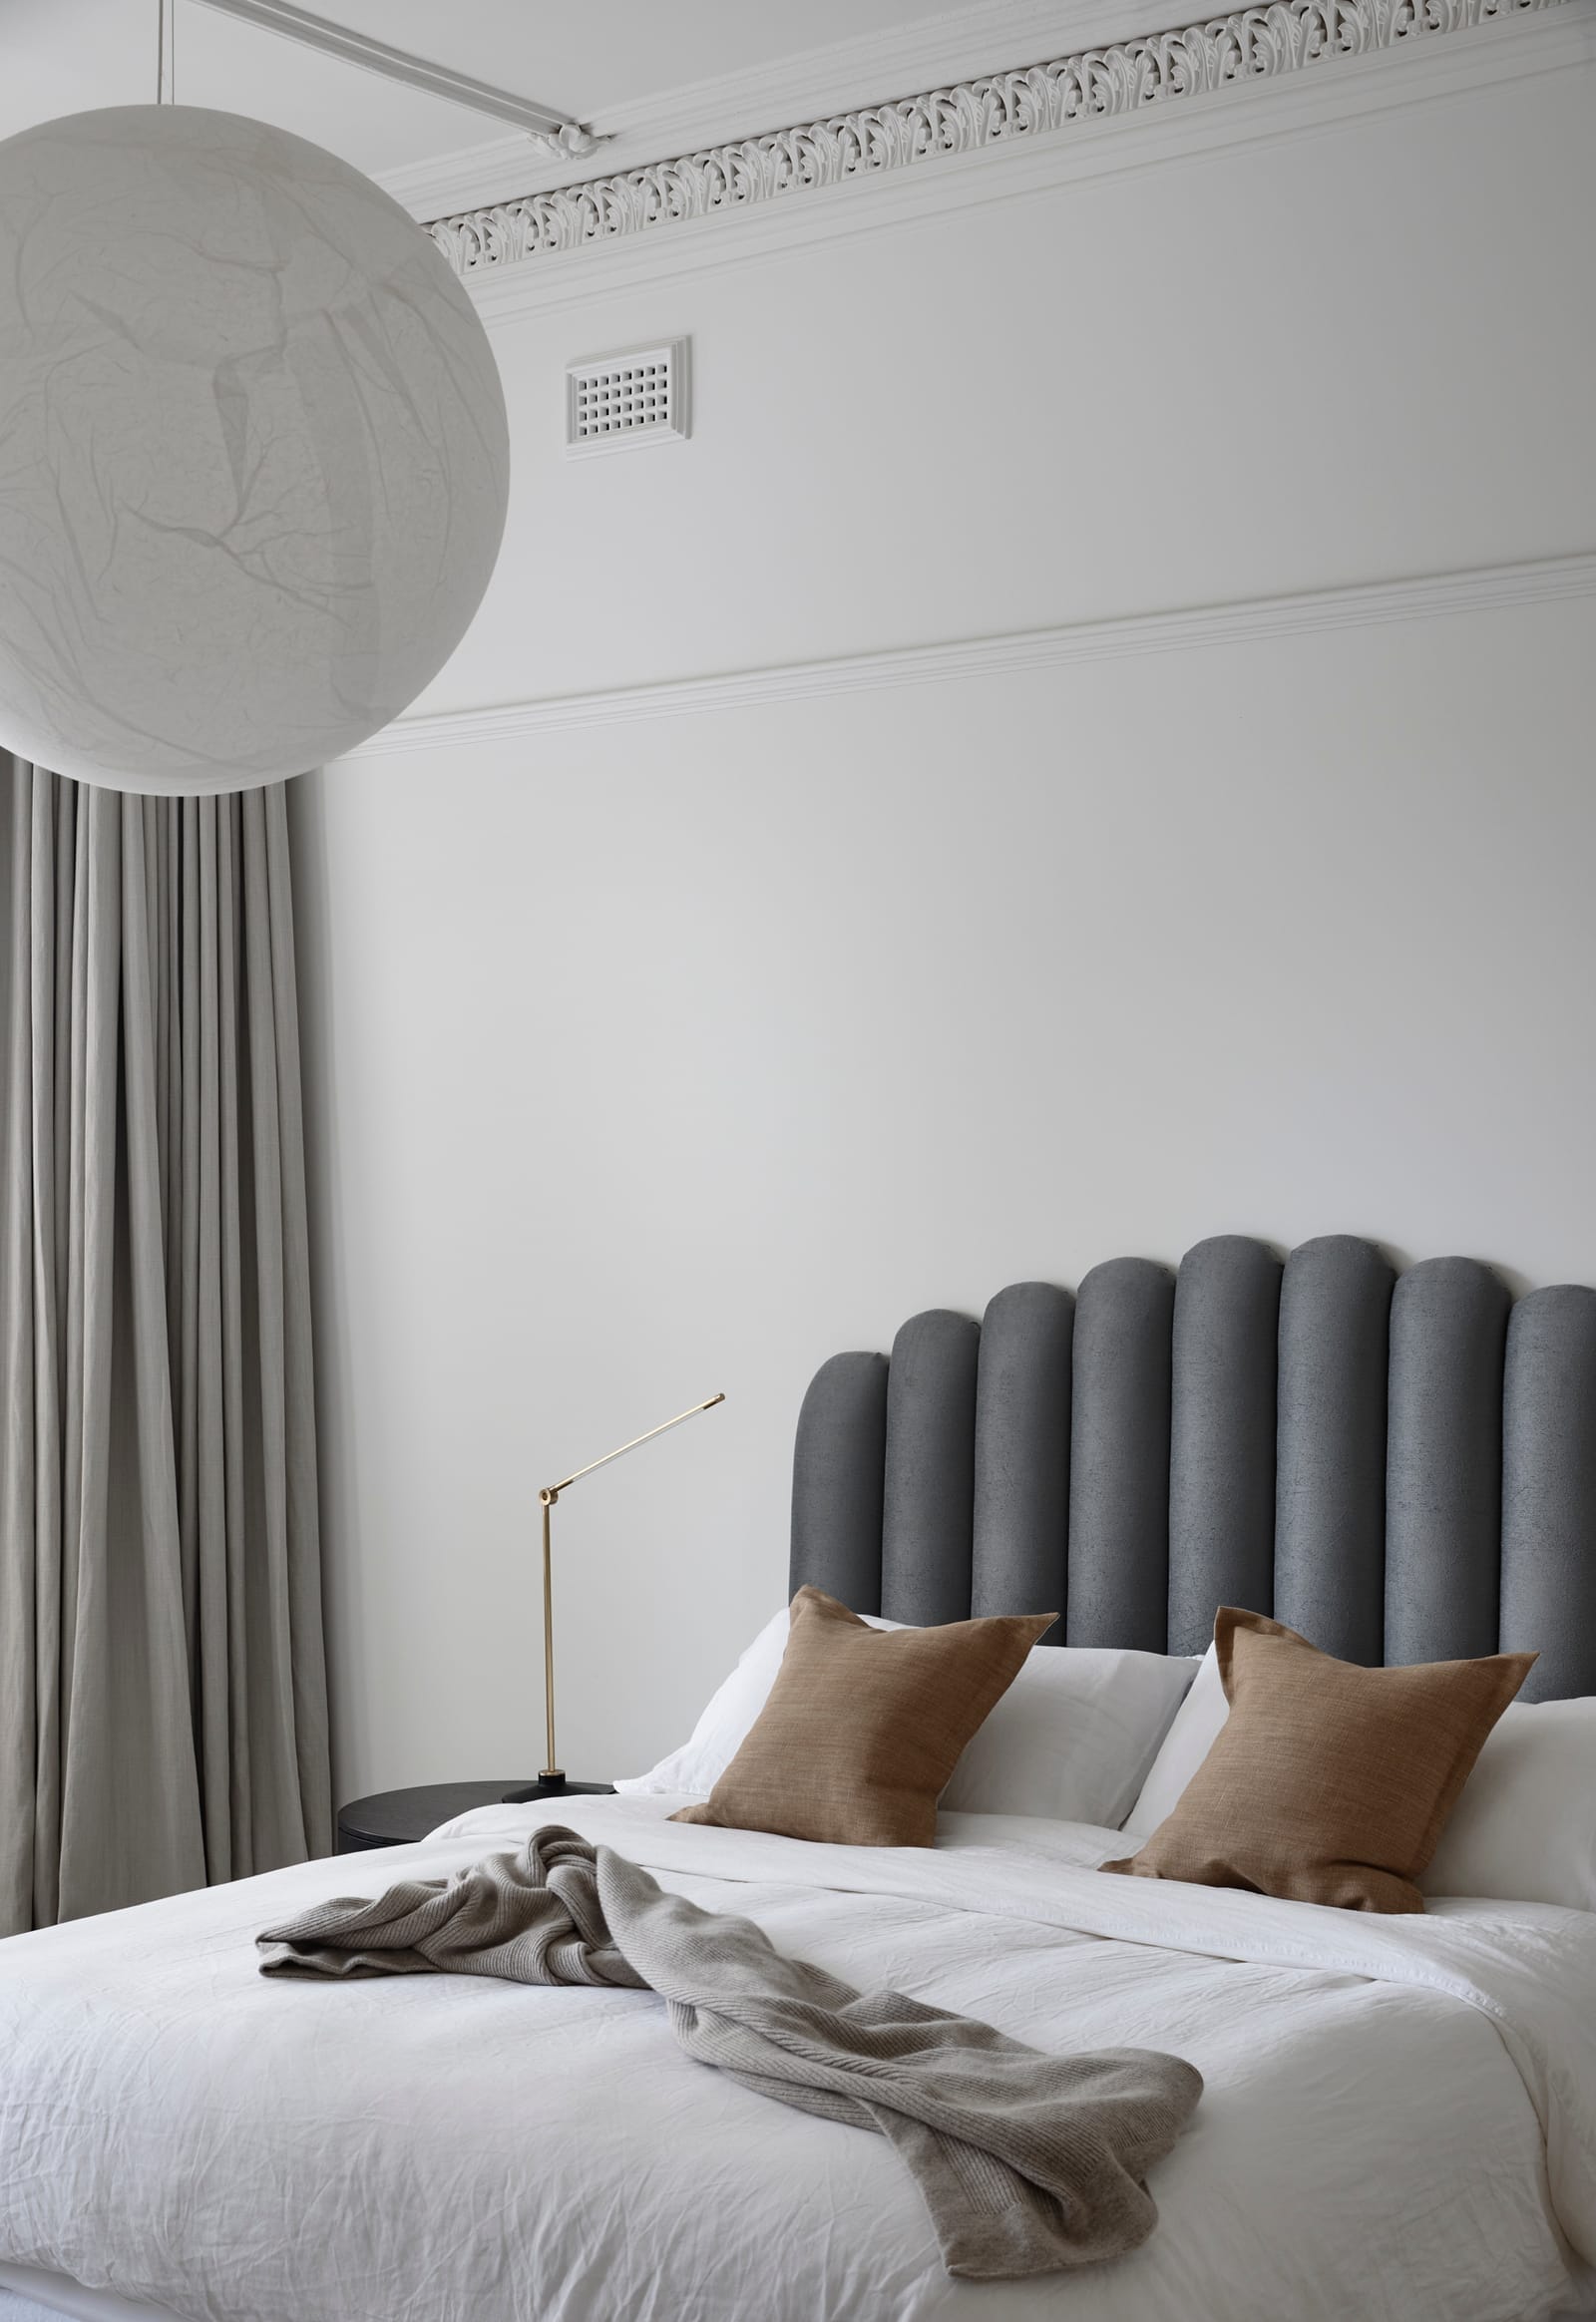 RE Residence by Inglis Architects.The room has a high ceiling and is painted in a soft white, with a large globe pendant light hanging off-center. The bed features a unique, cylindrical grey headboard, and is dressed with crisp white linens, a grey throw, and two earth-toned pillows. Elegant, floor-length curtains add a touch of luxury to the room. A brass reading lamp on the right completes the setting.